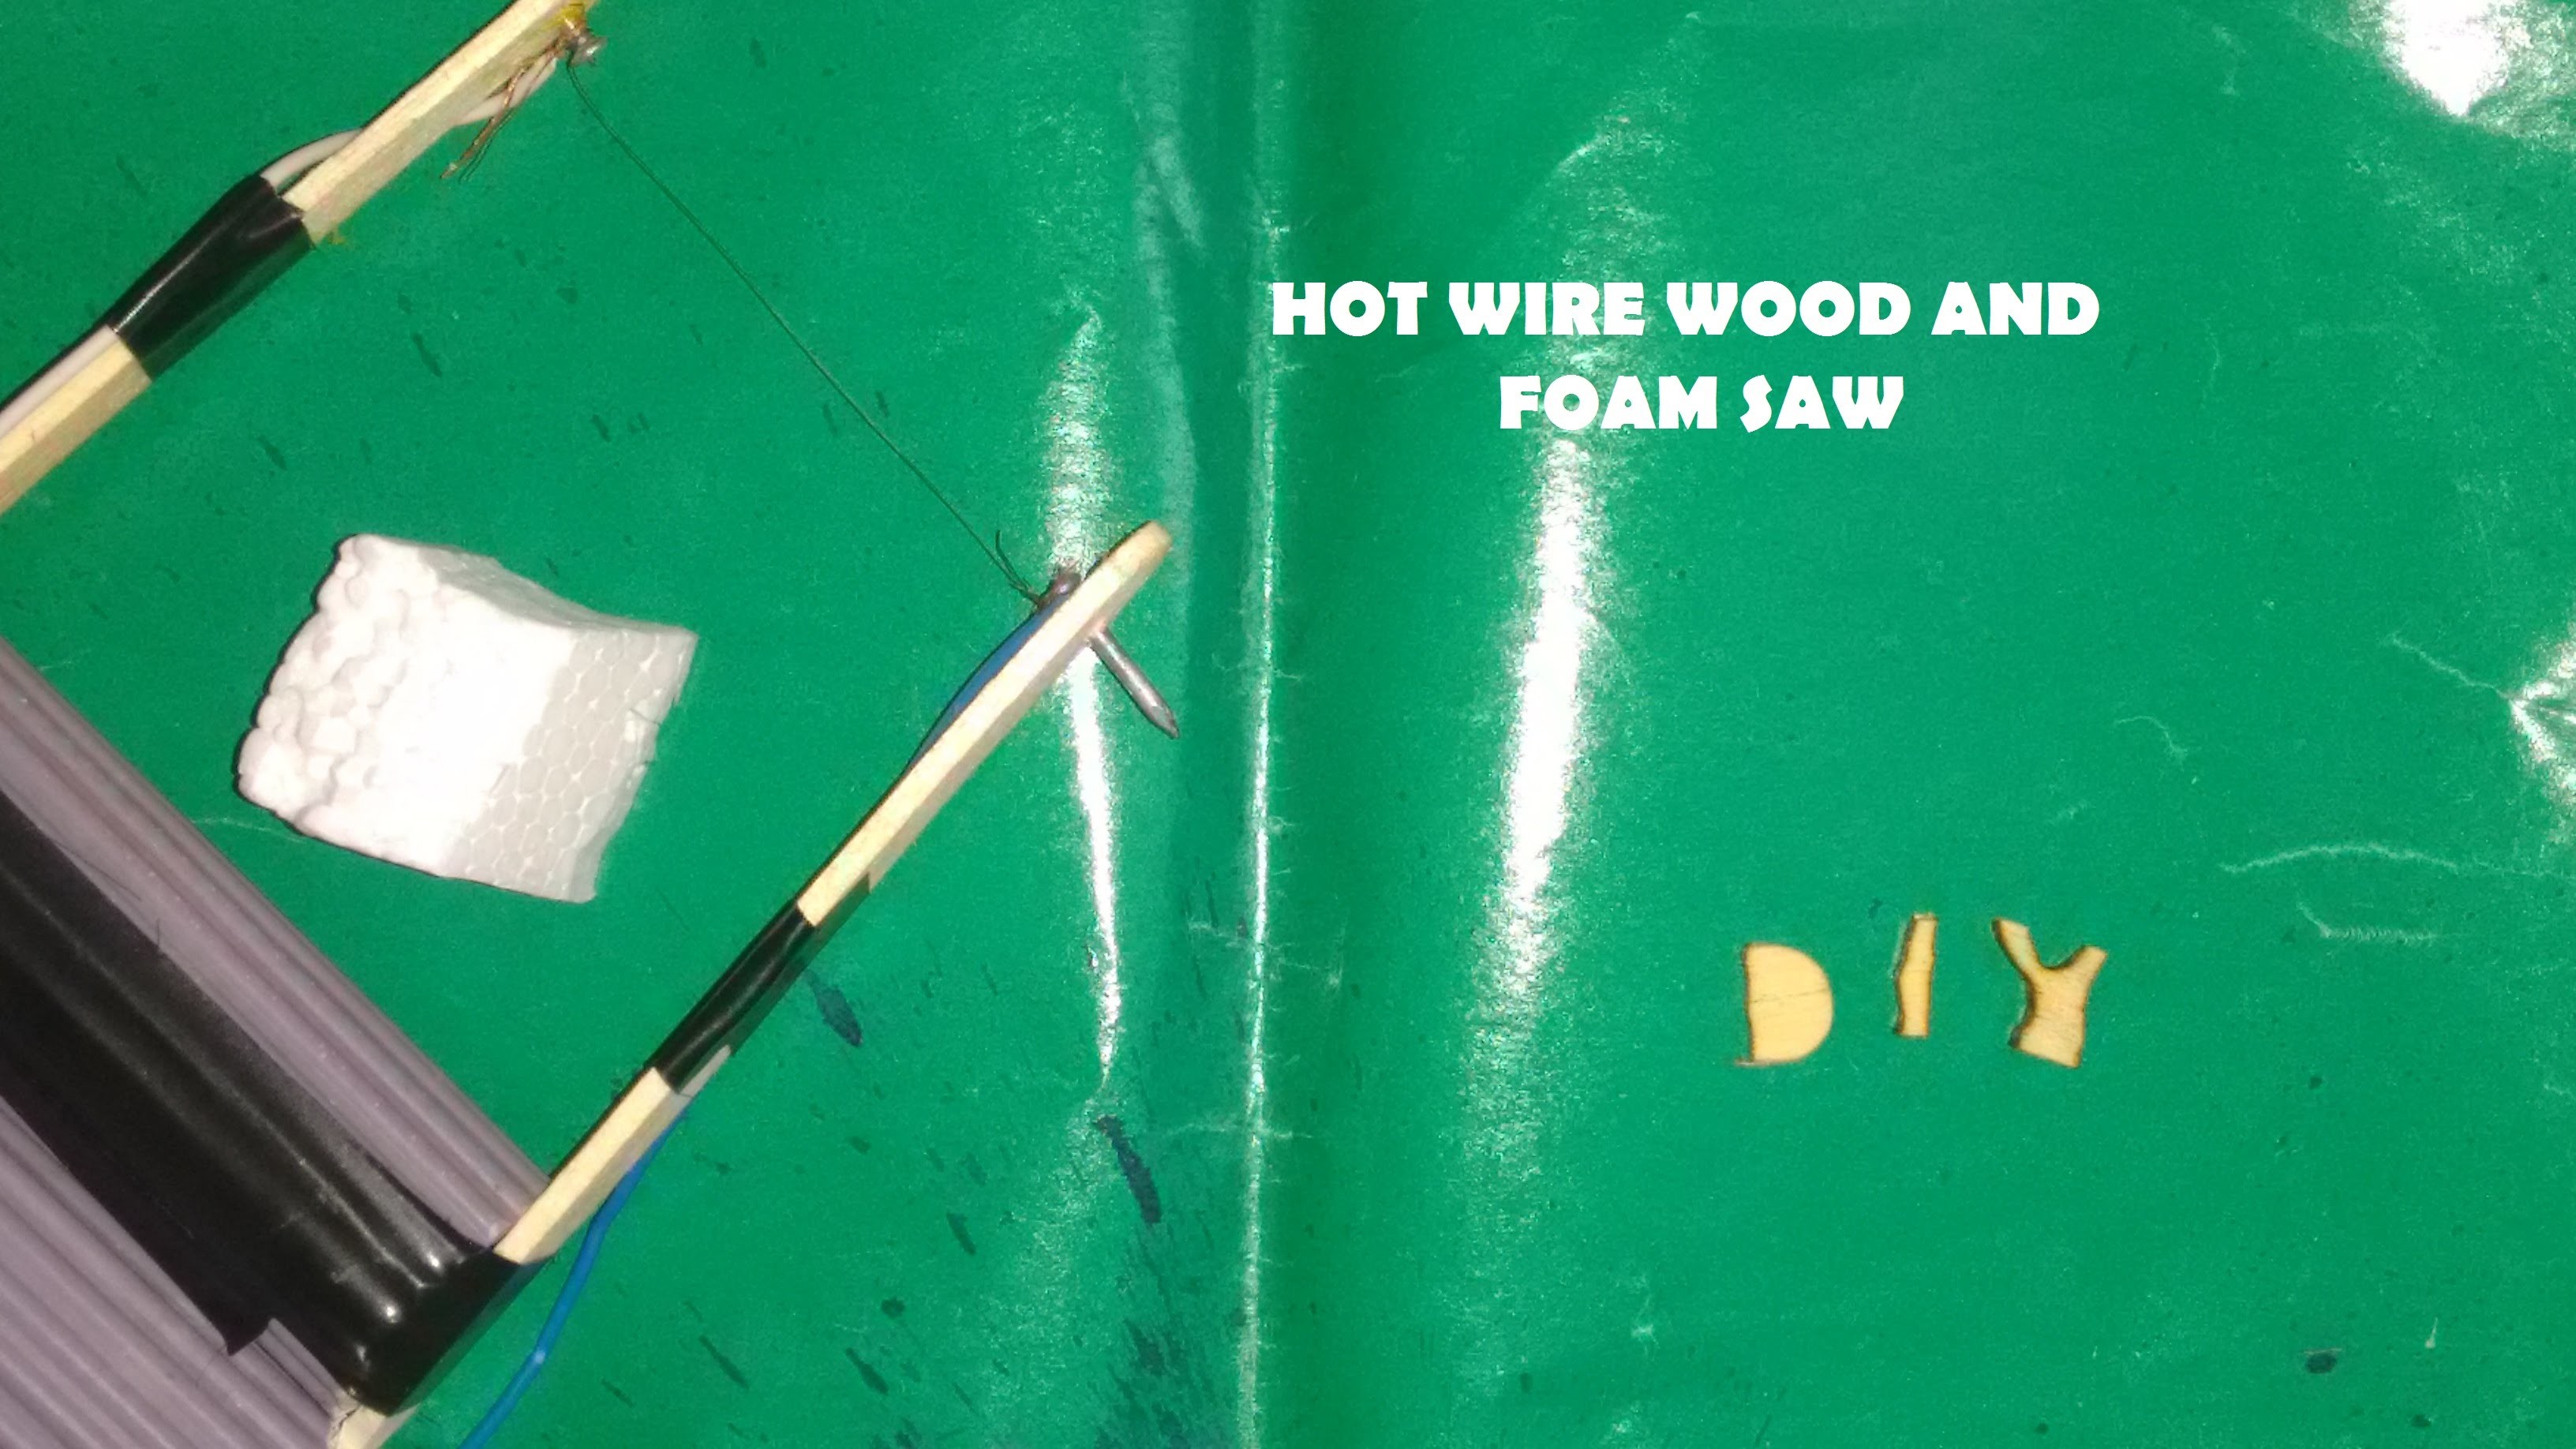 HOW TO MAKE A HOT WIRE FOAM AND WOOD CUTTER